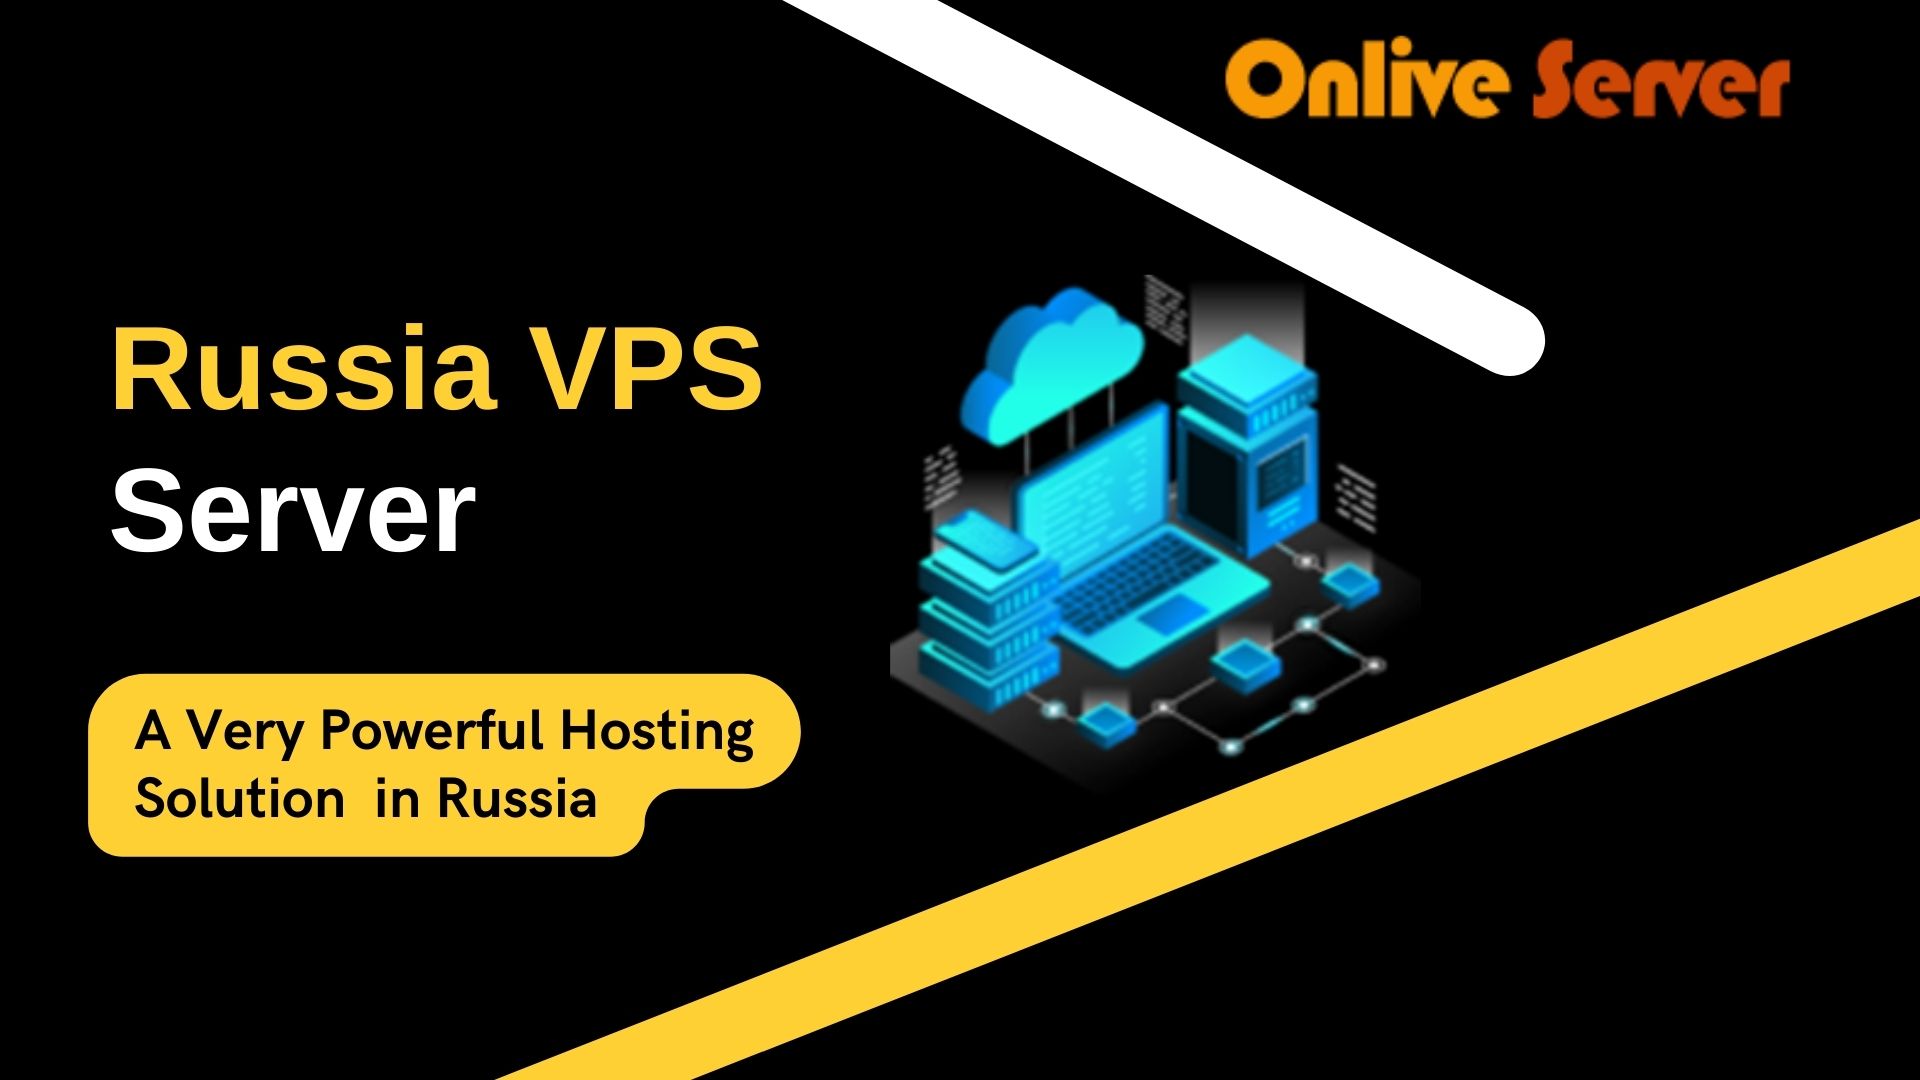 Russia VPS Server